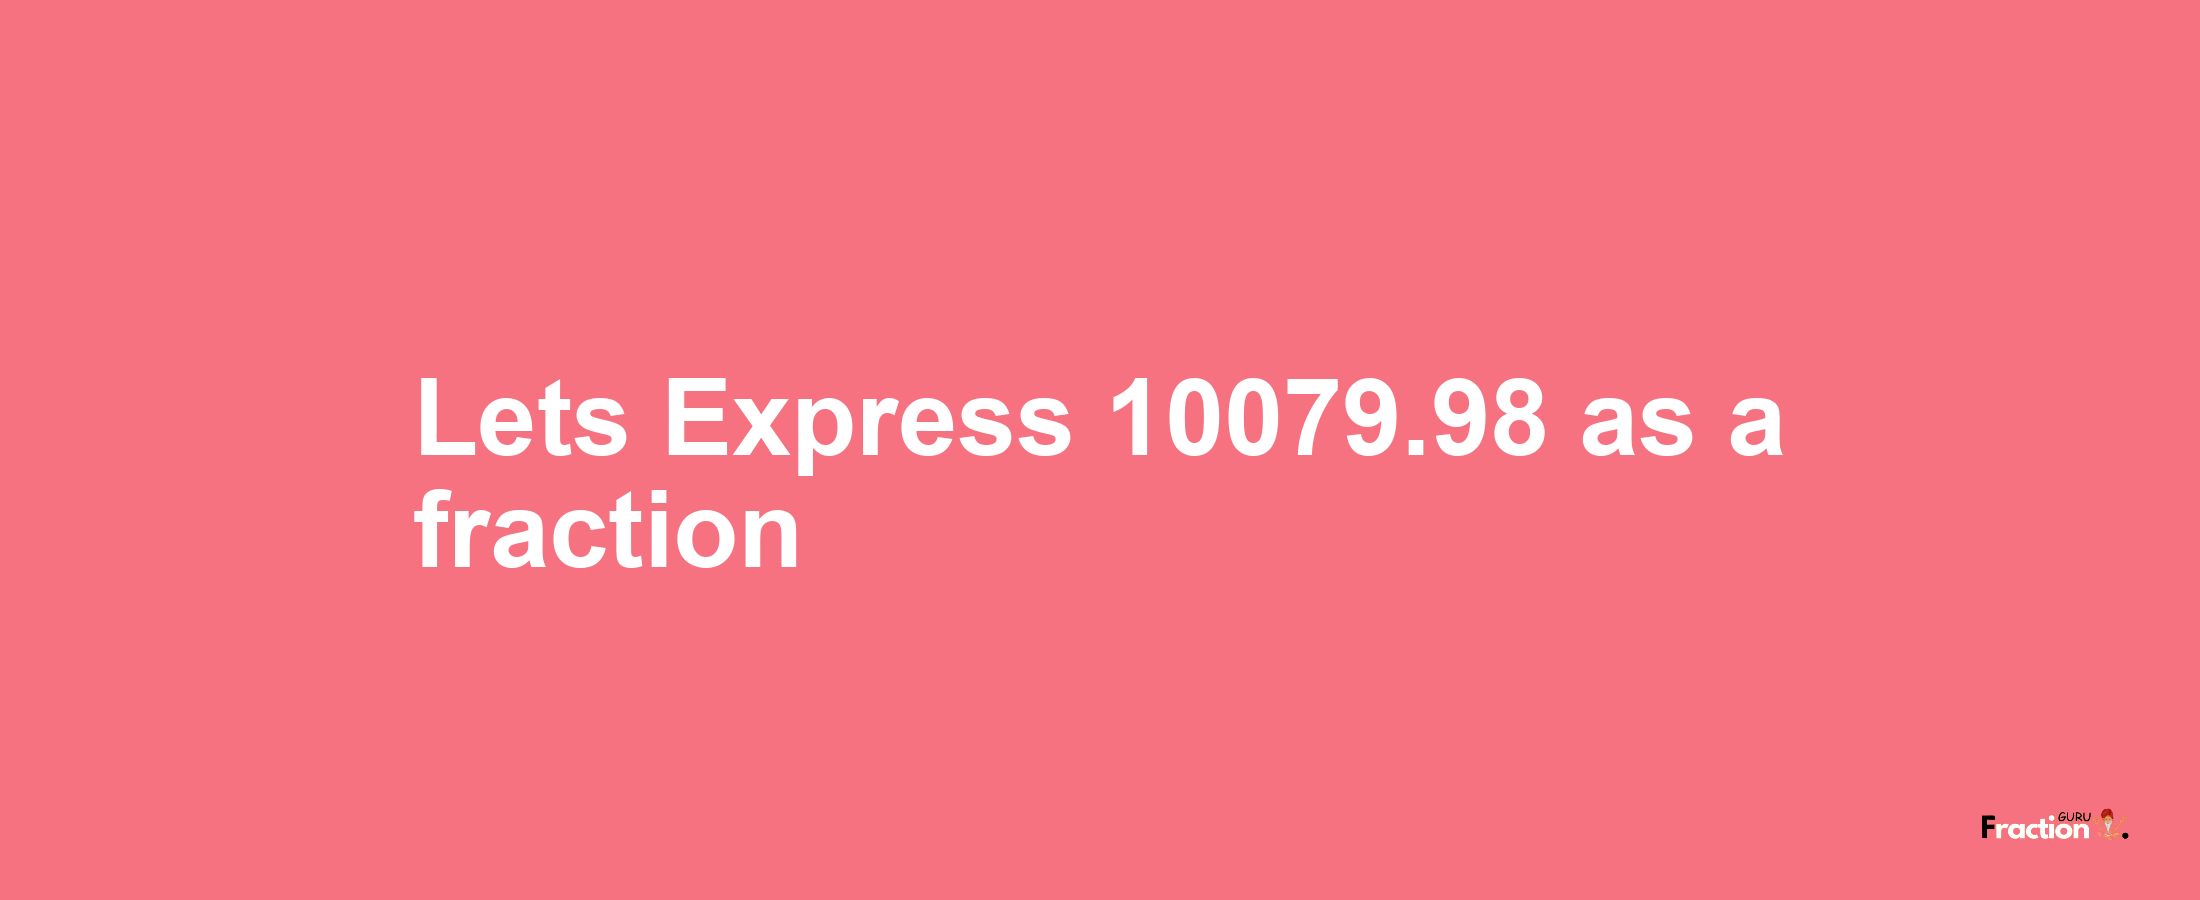 Lets Express 10079.98 as afraction